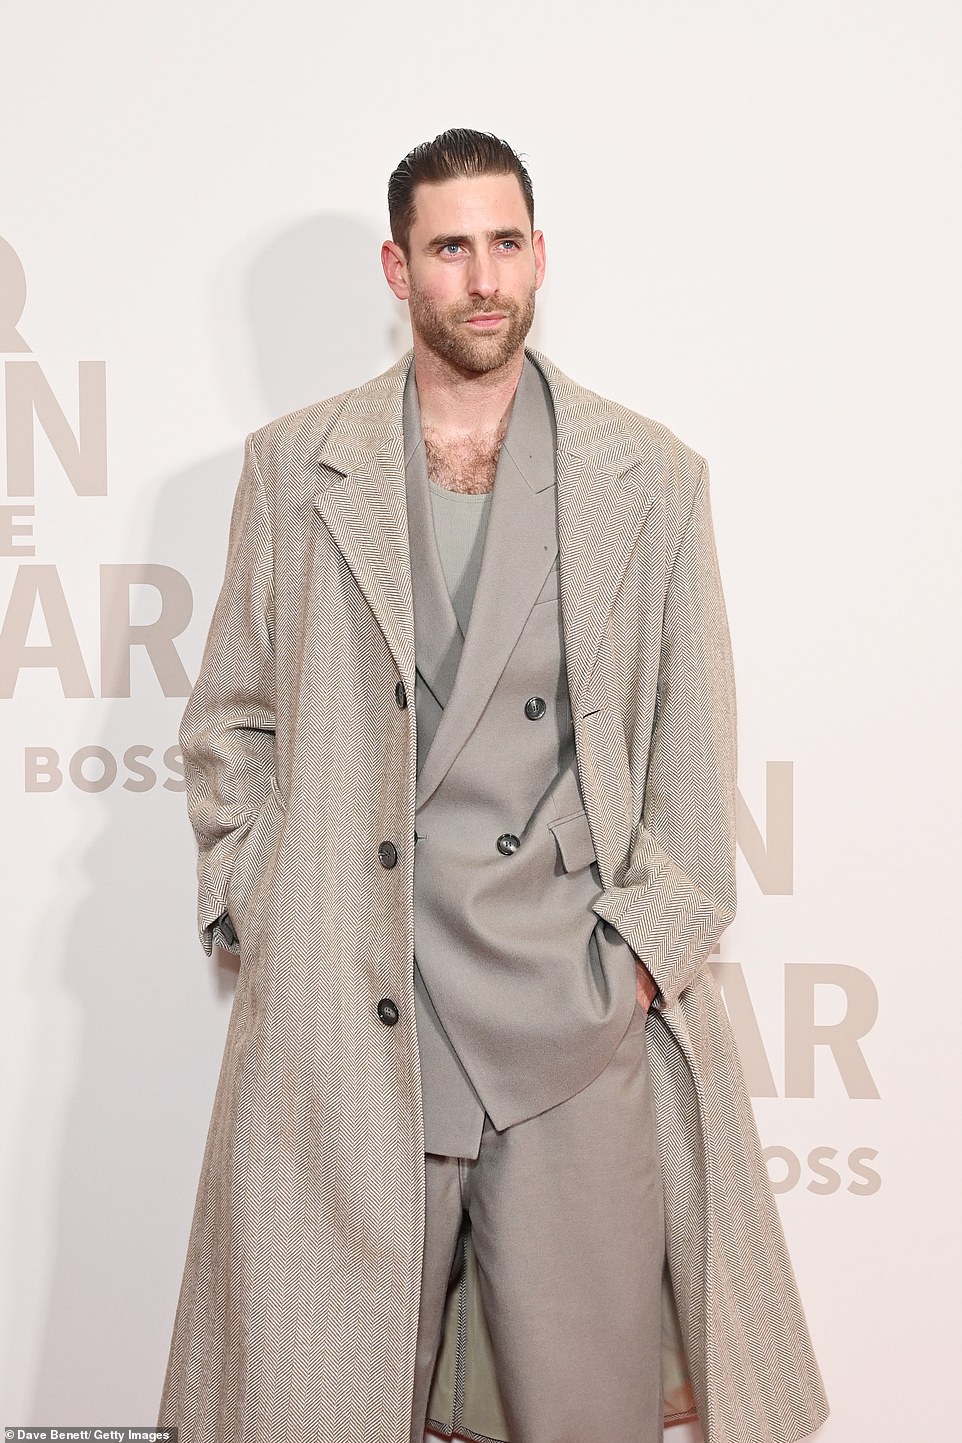 Dashing: Oliver Jackson-Cohen looked dapper in an all-beige ensemble